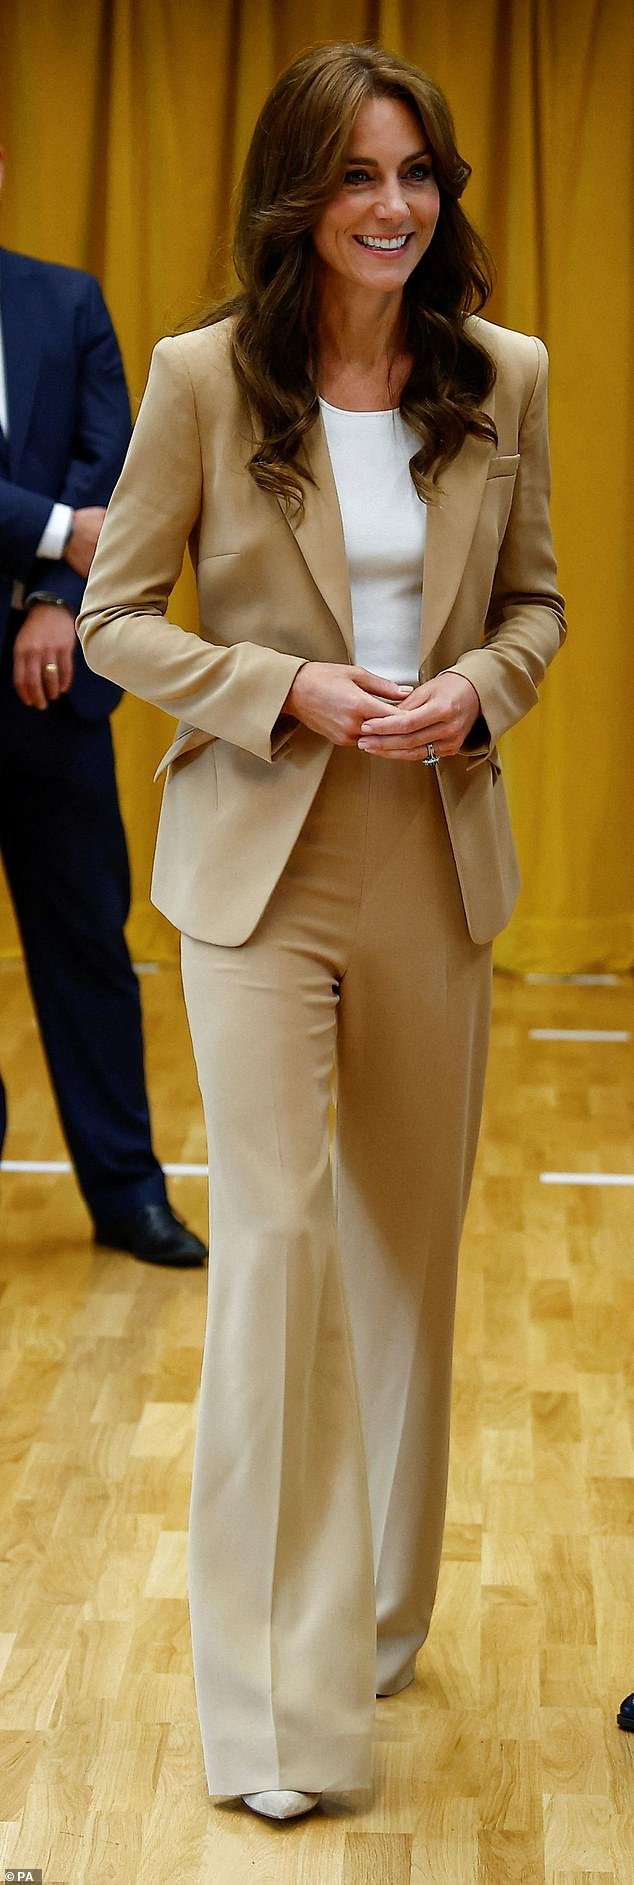 Kate Middleton channeled 'cappuccino couture' in a stylish camel Roland Mouret suit and cream top during a visit to a youth charity in east London this week